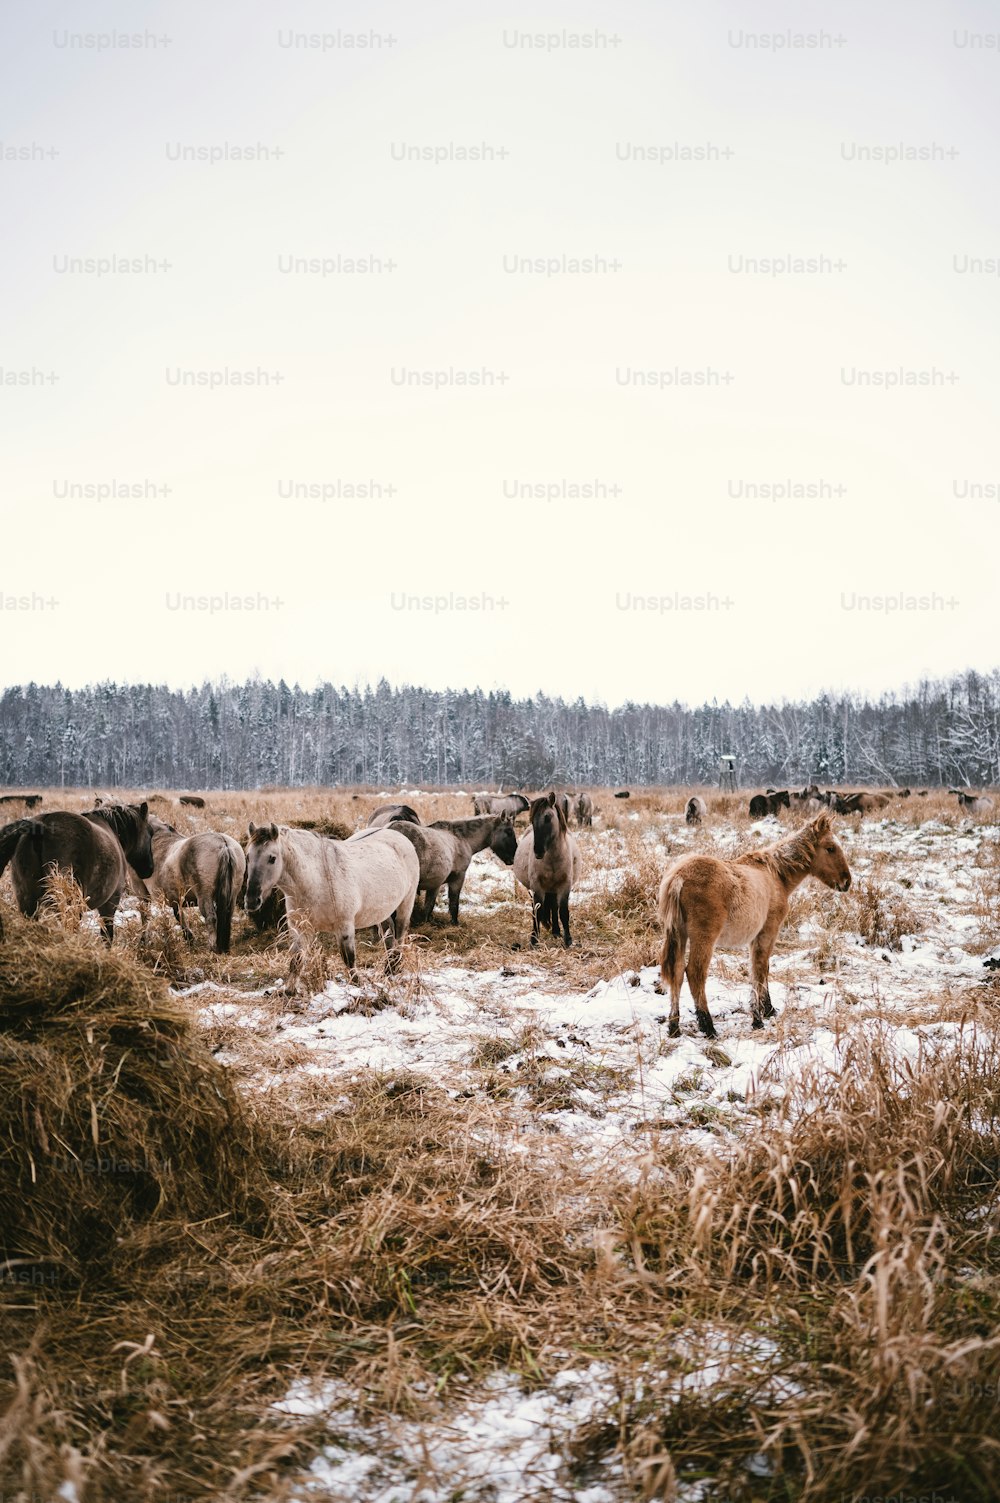 a group of horses walking in a snowy field